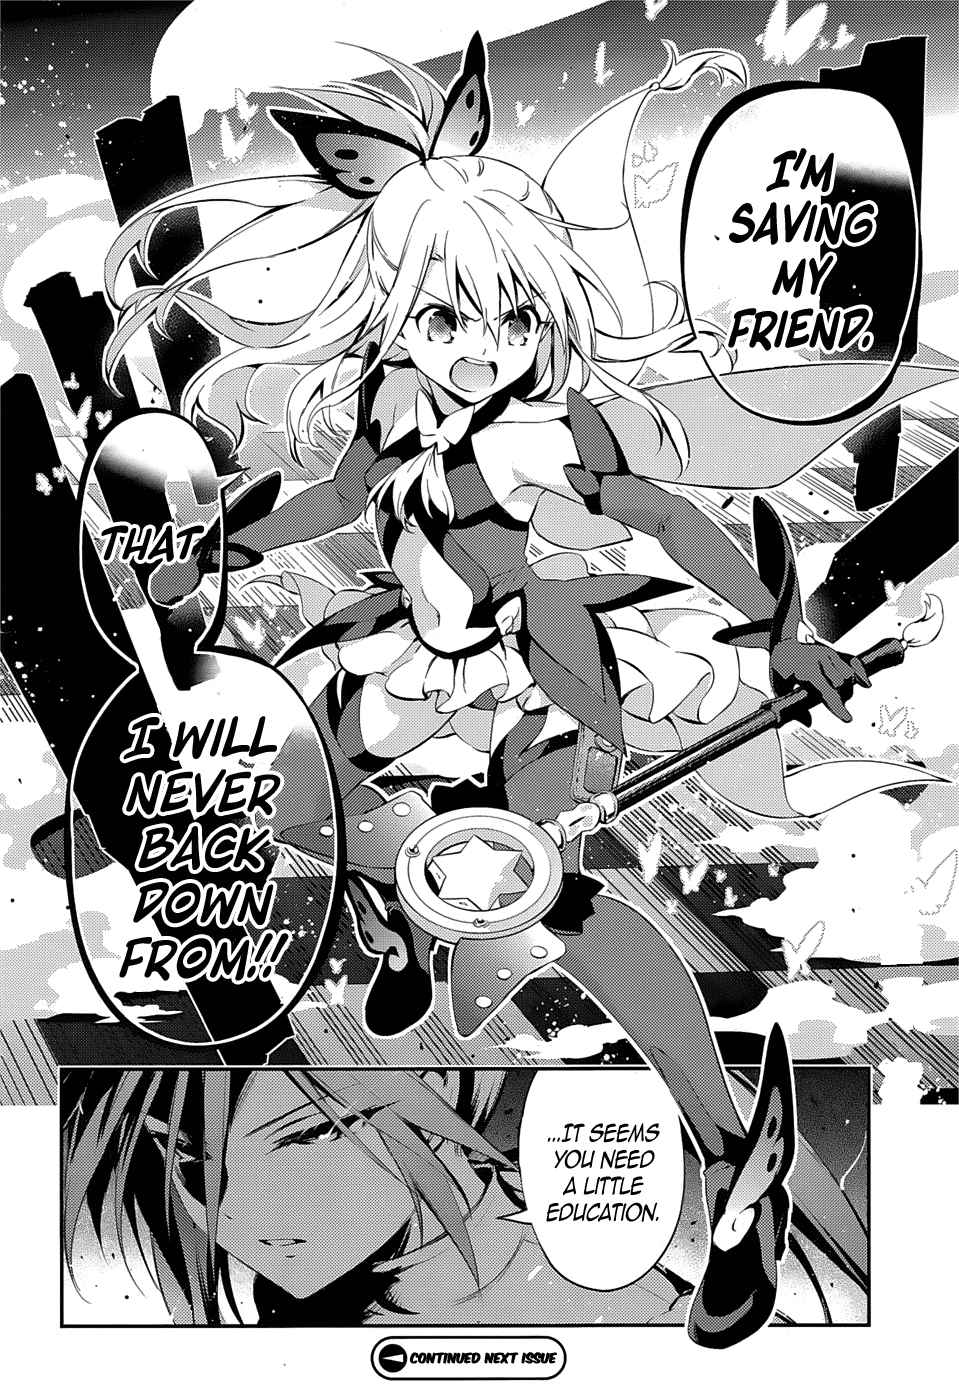 Fate/kaleid liner PRISMA☆ILLYA 3rei!! Vol. 4 Ch. 16 People and Tools